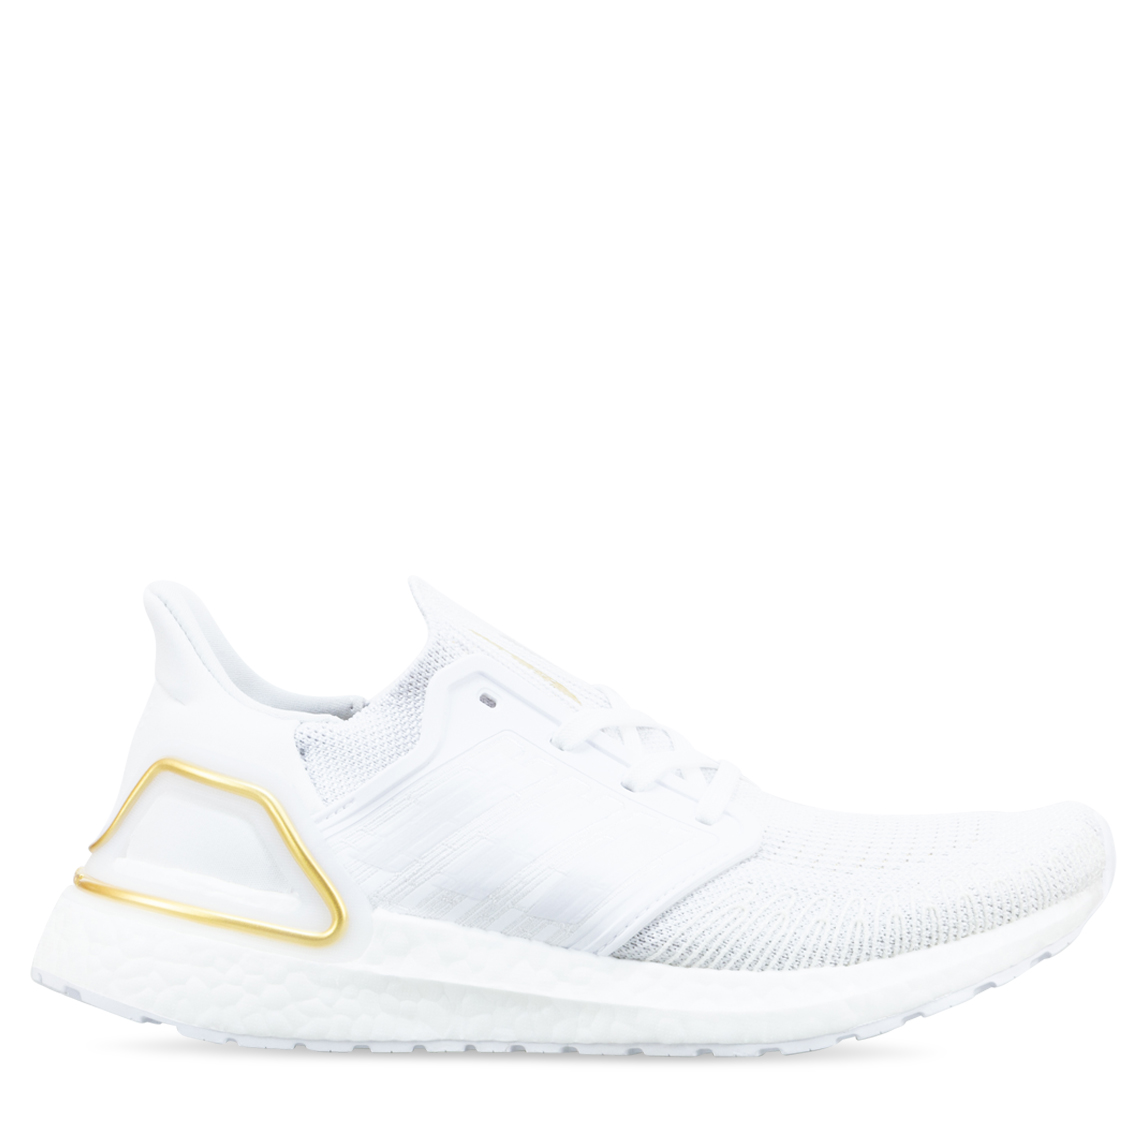 white and gold ultraboost 20